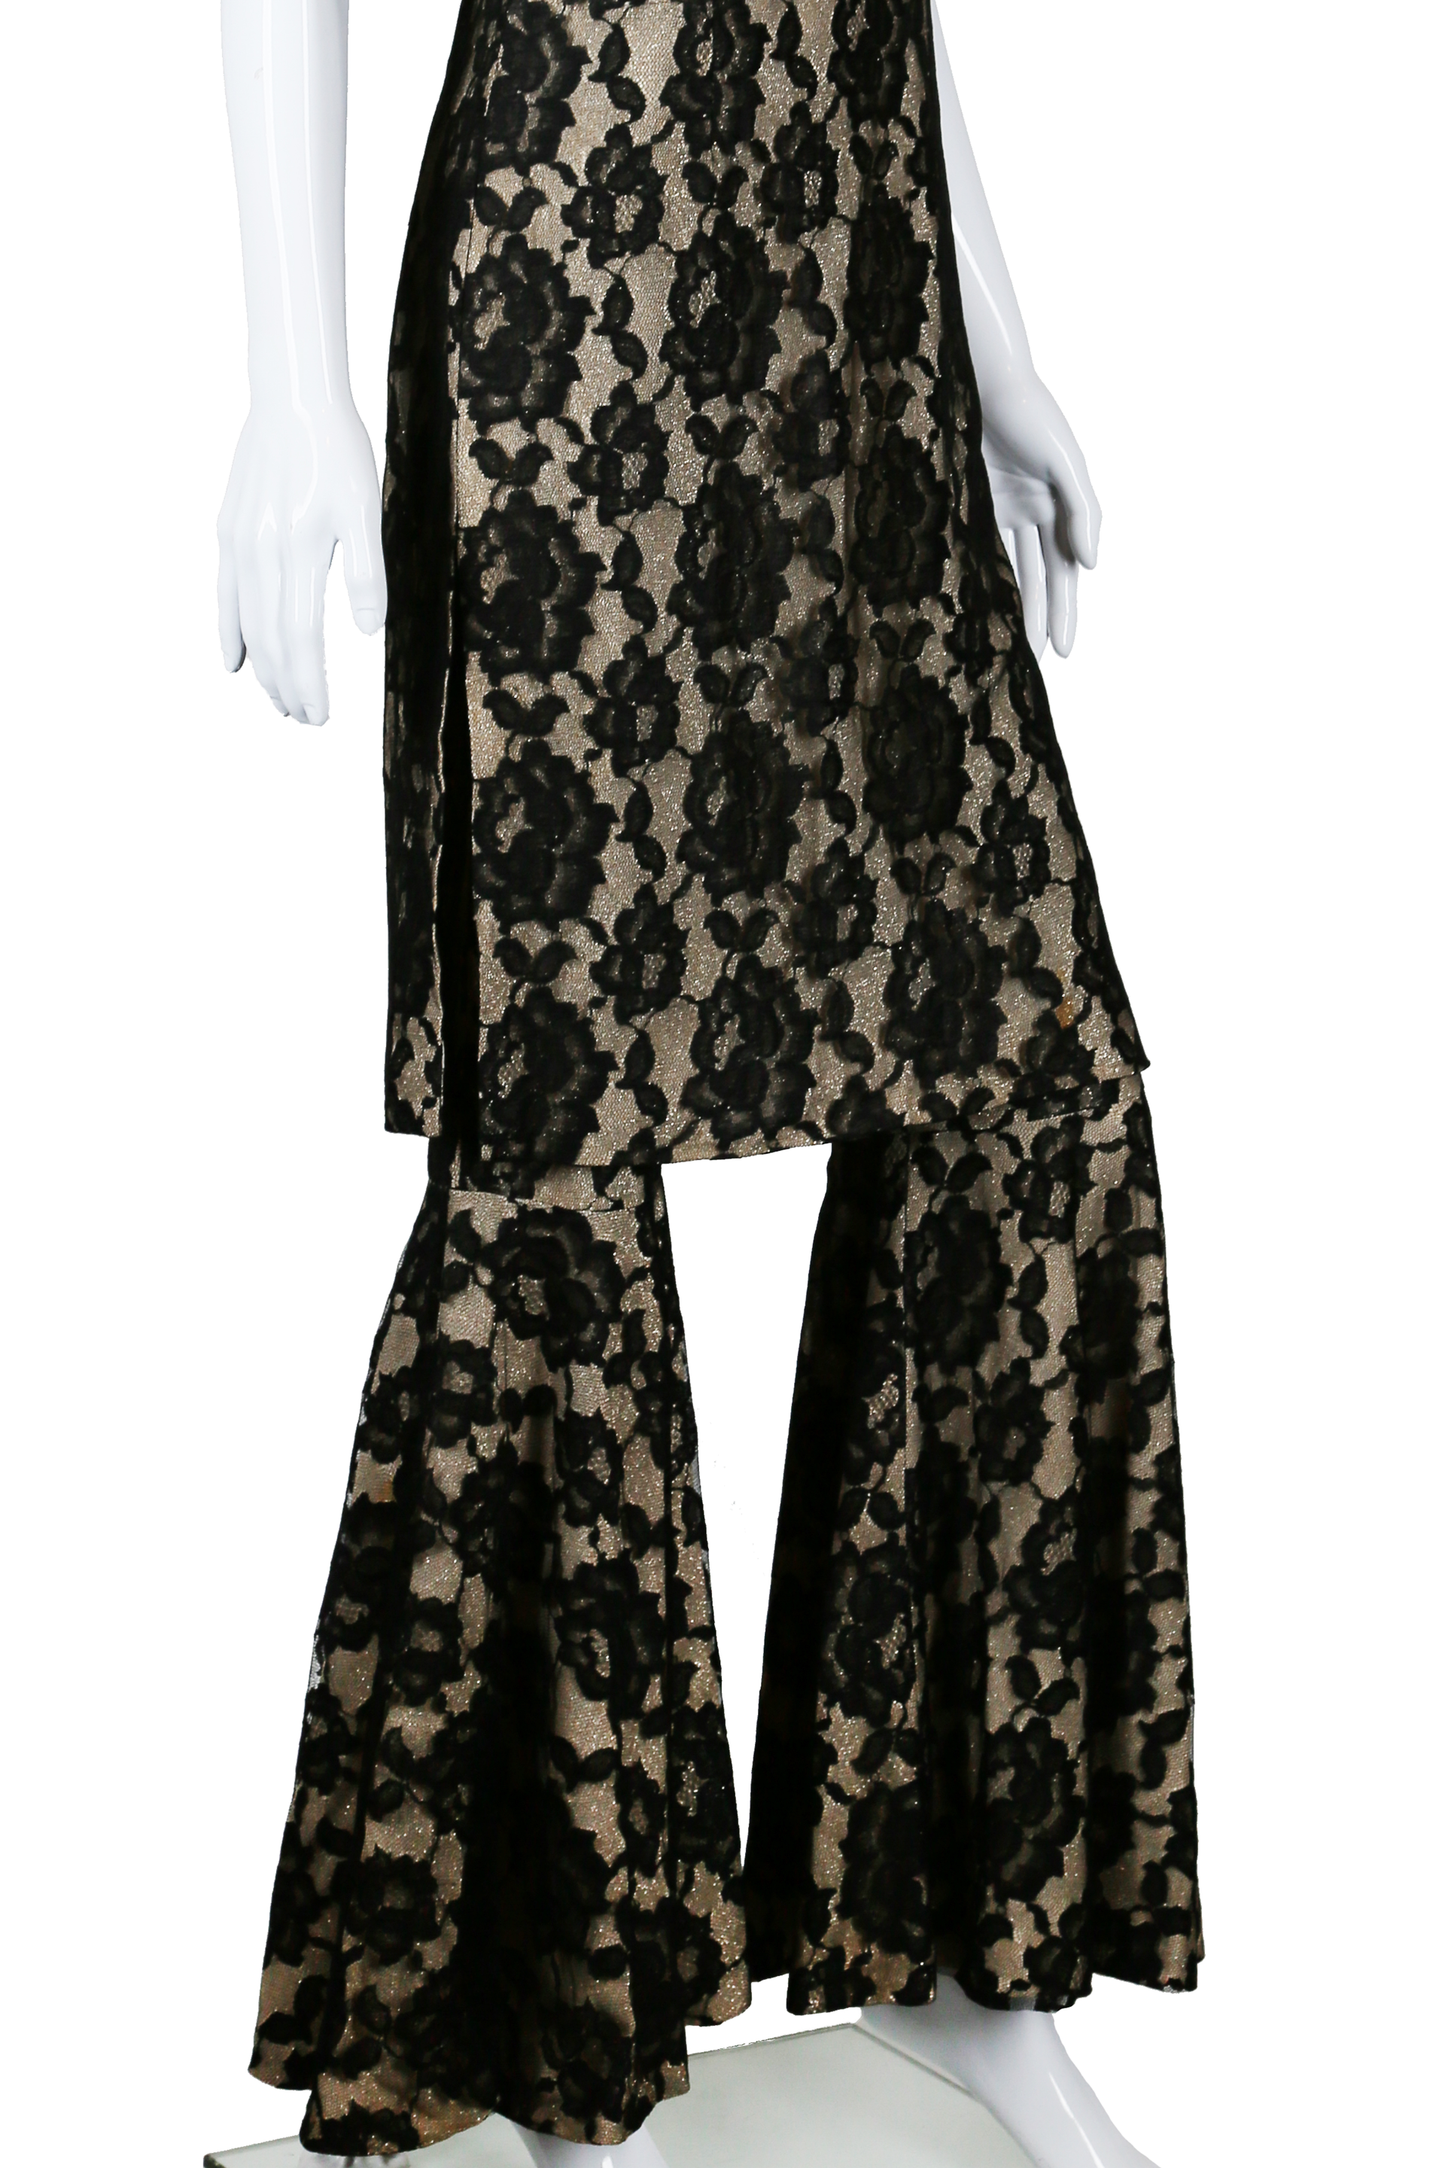 Lilli Diamond Lace and Lamé Bell Bottoms Set - Embers / Cinders Vintage